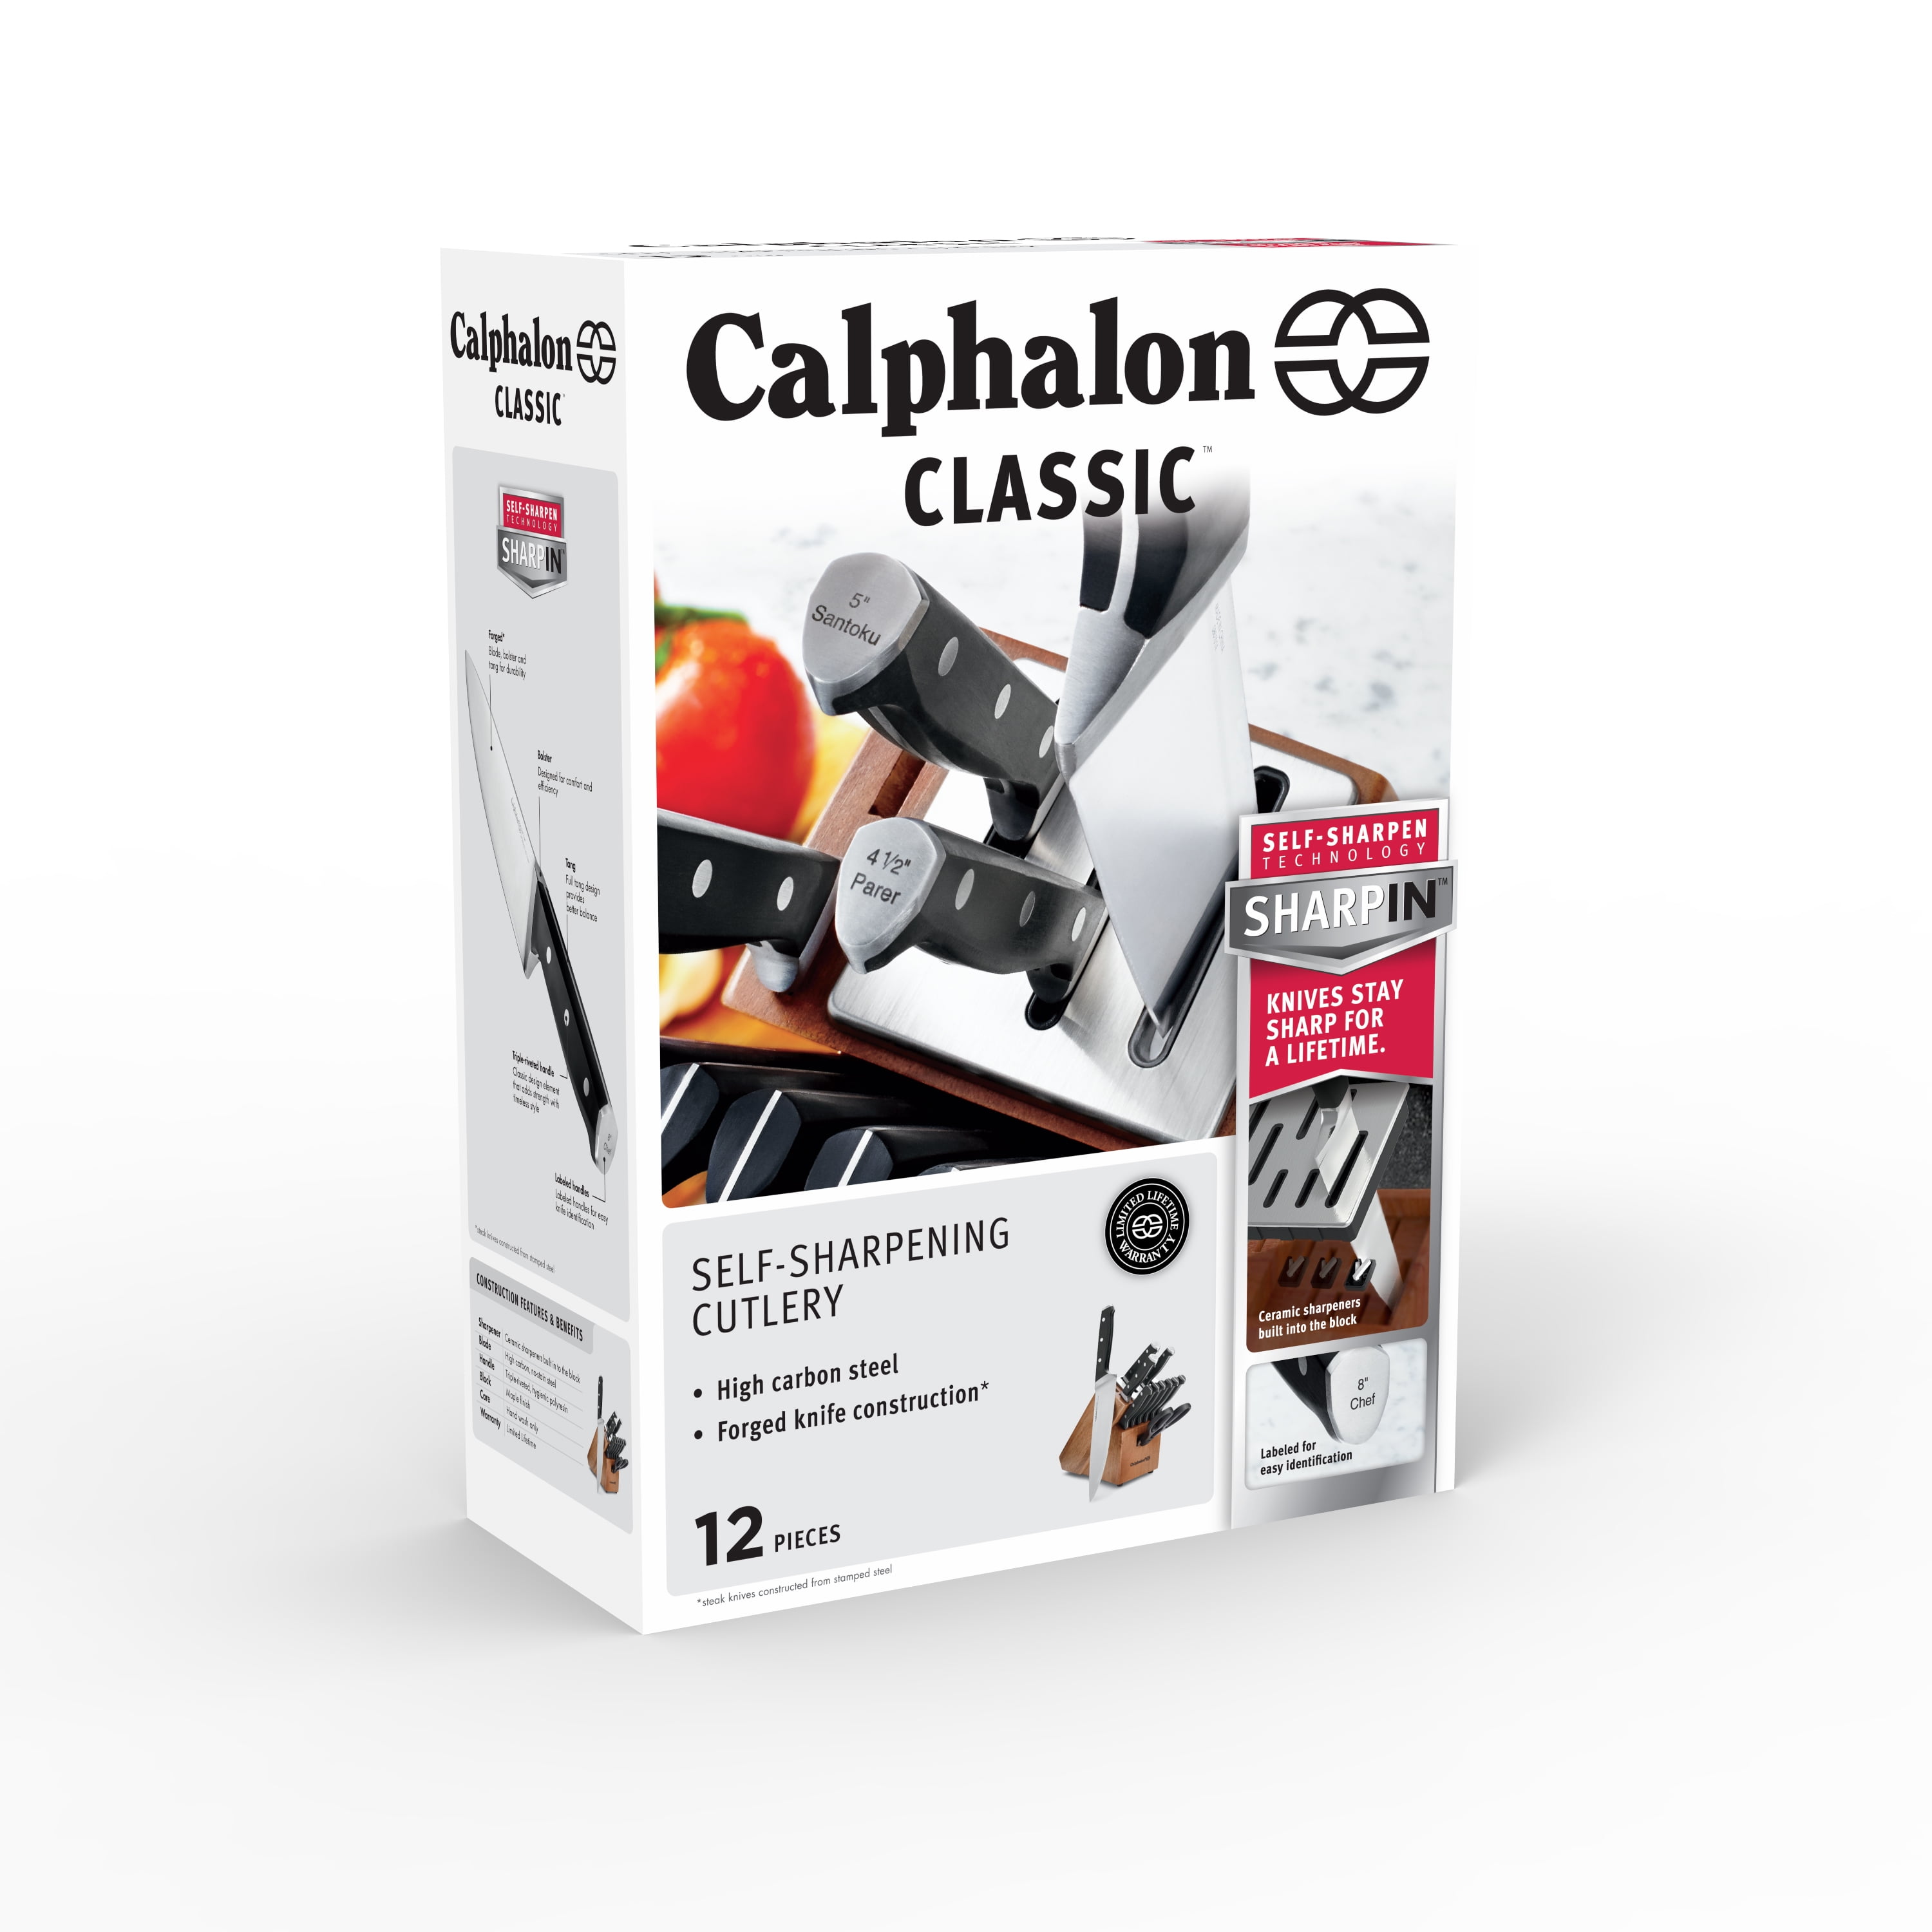 Calphalon Classic 15-Piece Self-Sharpening Stainless Steel Cutlery Knife  and Block Set with Sharp in Technology 2017942 - The Home Depot